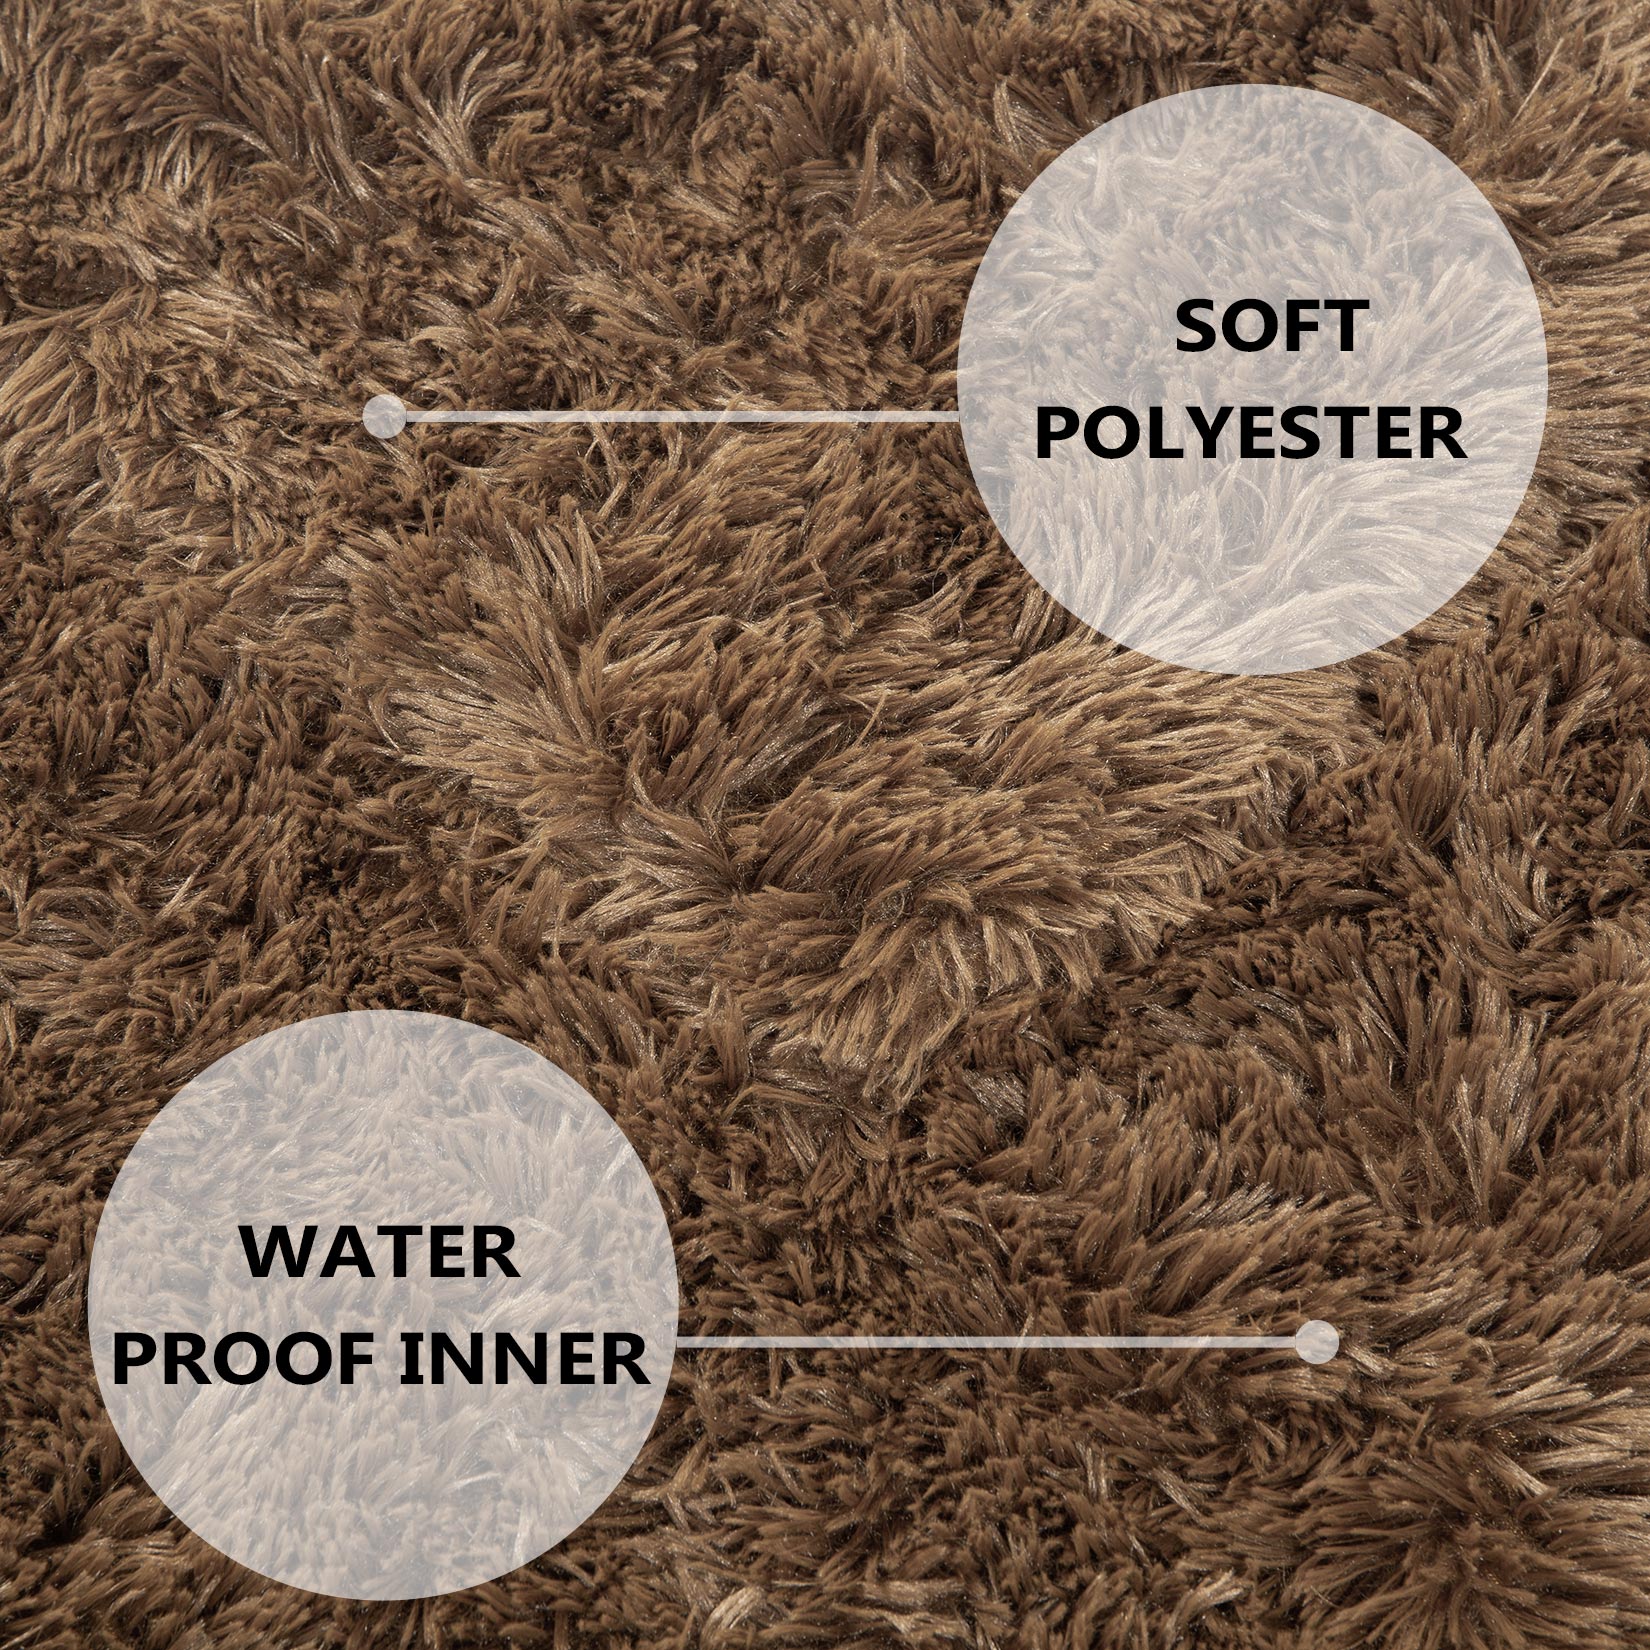 HA-EMORE Waterproof Dog Blanket for Bed Couch Sofa Soft Warm Fluffy Faux Fur Fleece Puppy Blankets Machine Washable Pet Blanket Brown 80×120cm - image 4 of 4